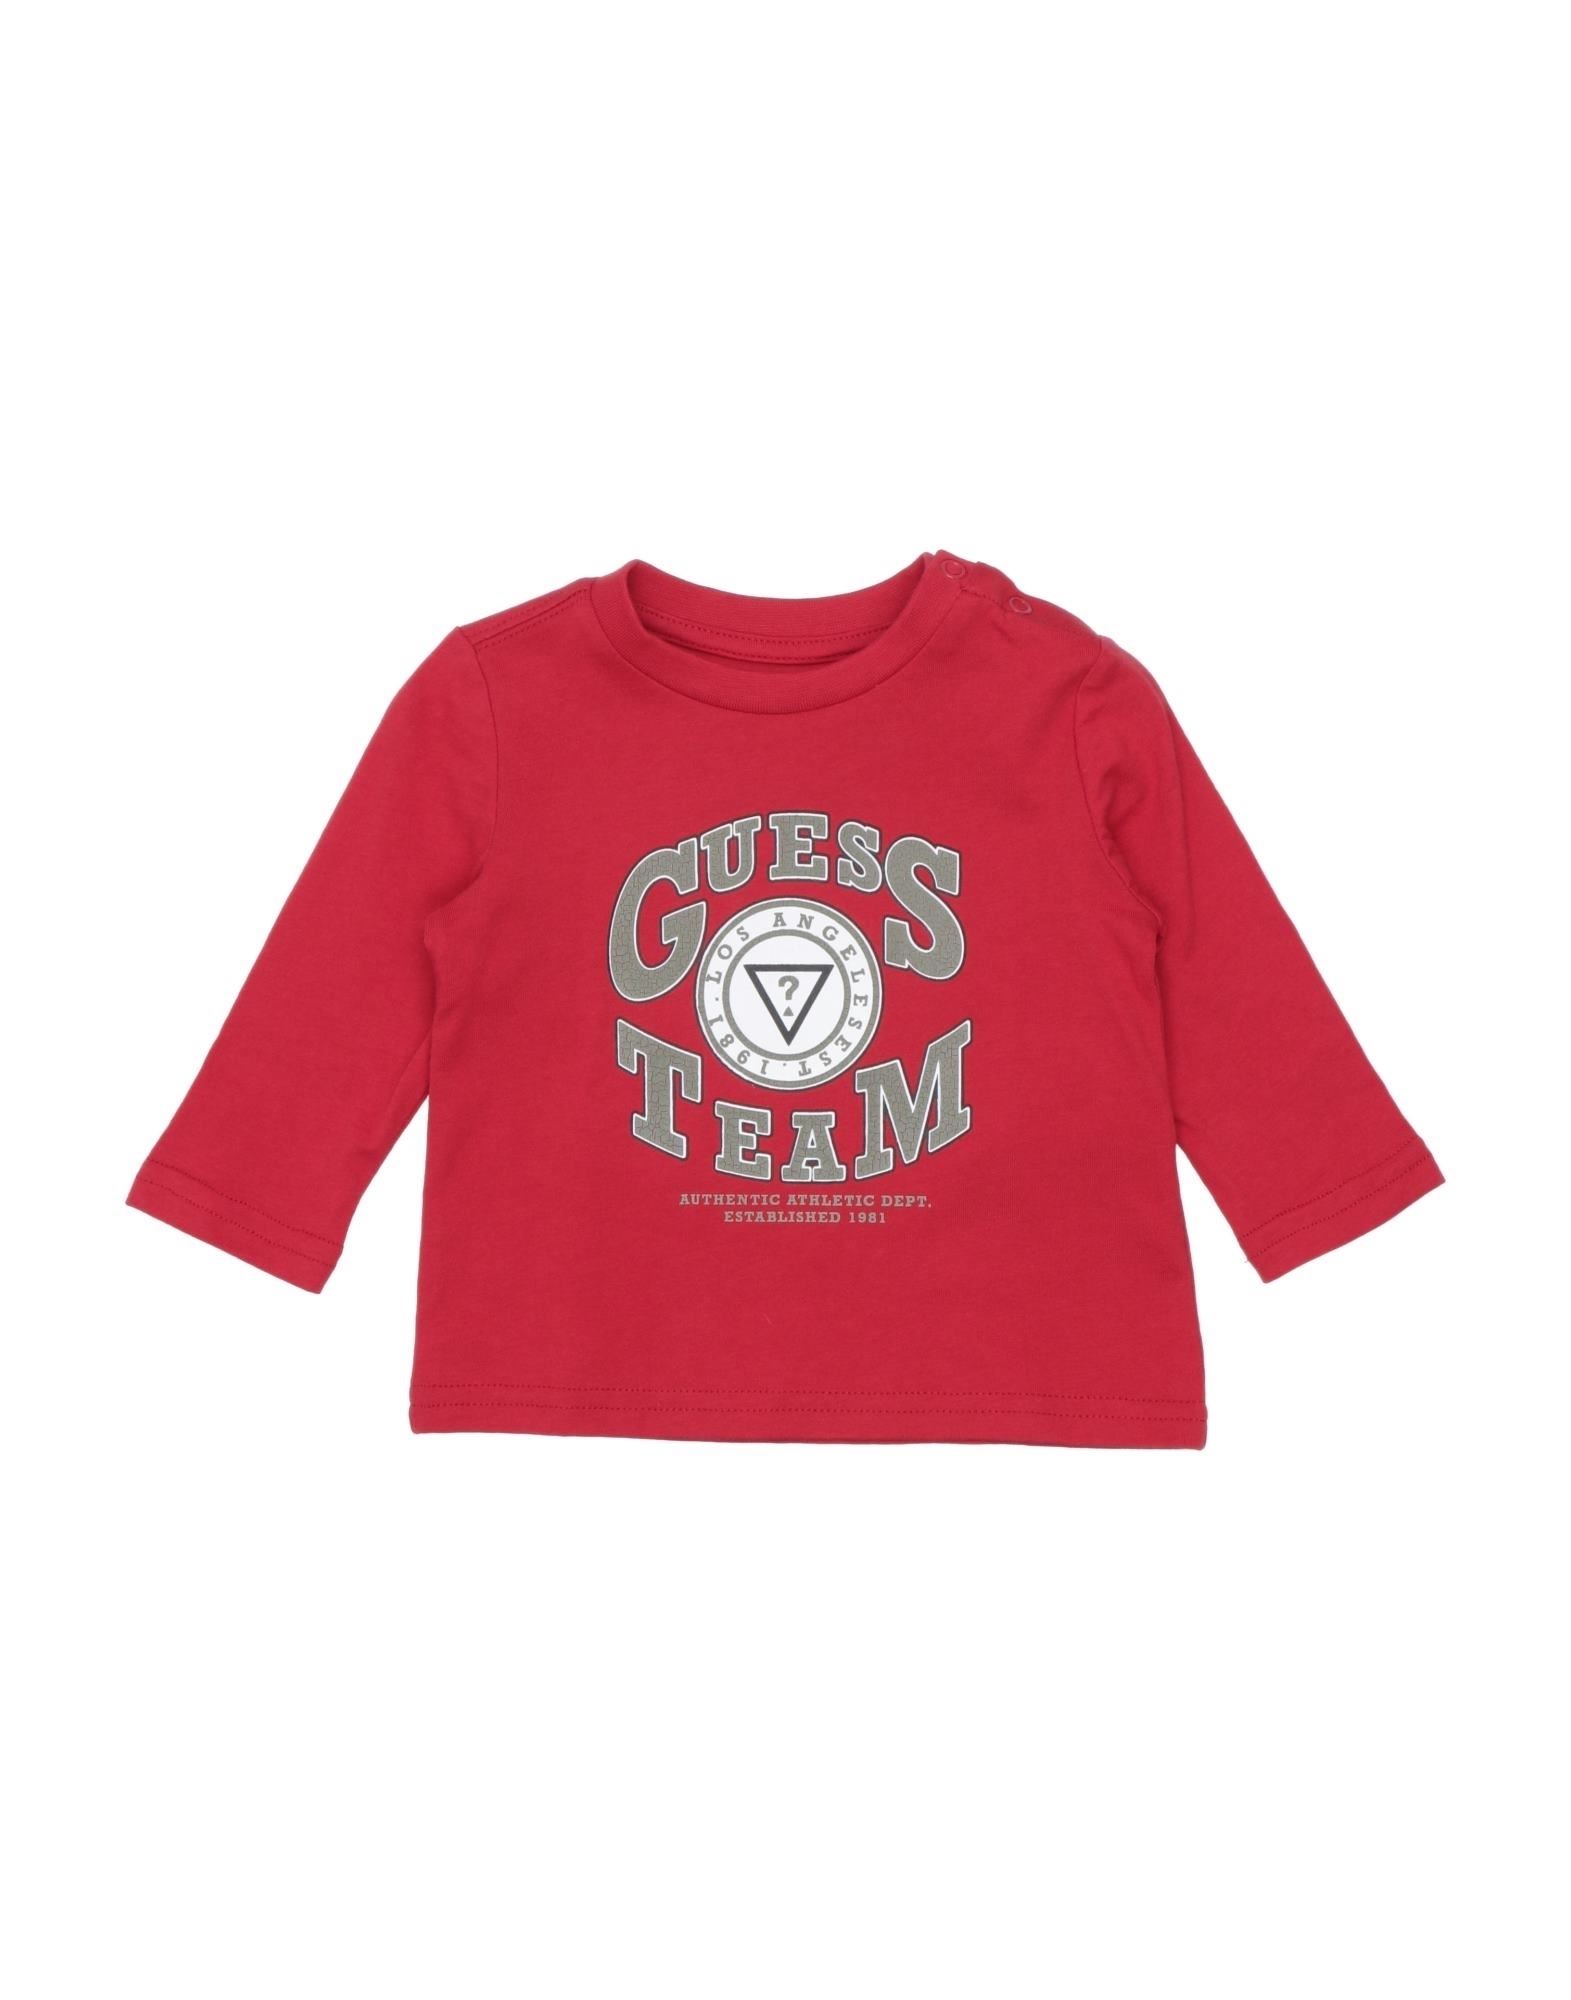 Guess Kids'  T-shirts In Red